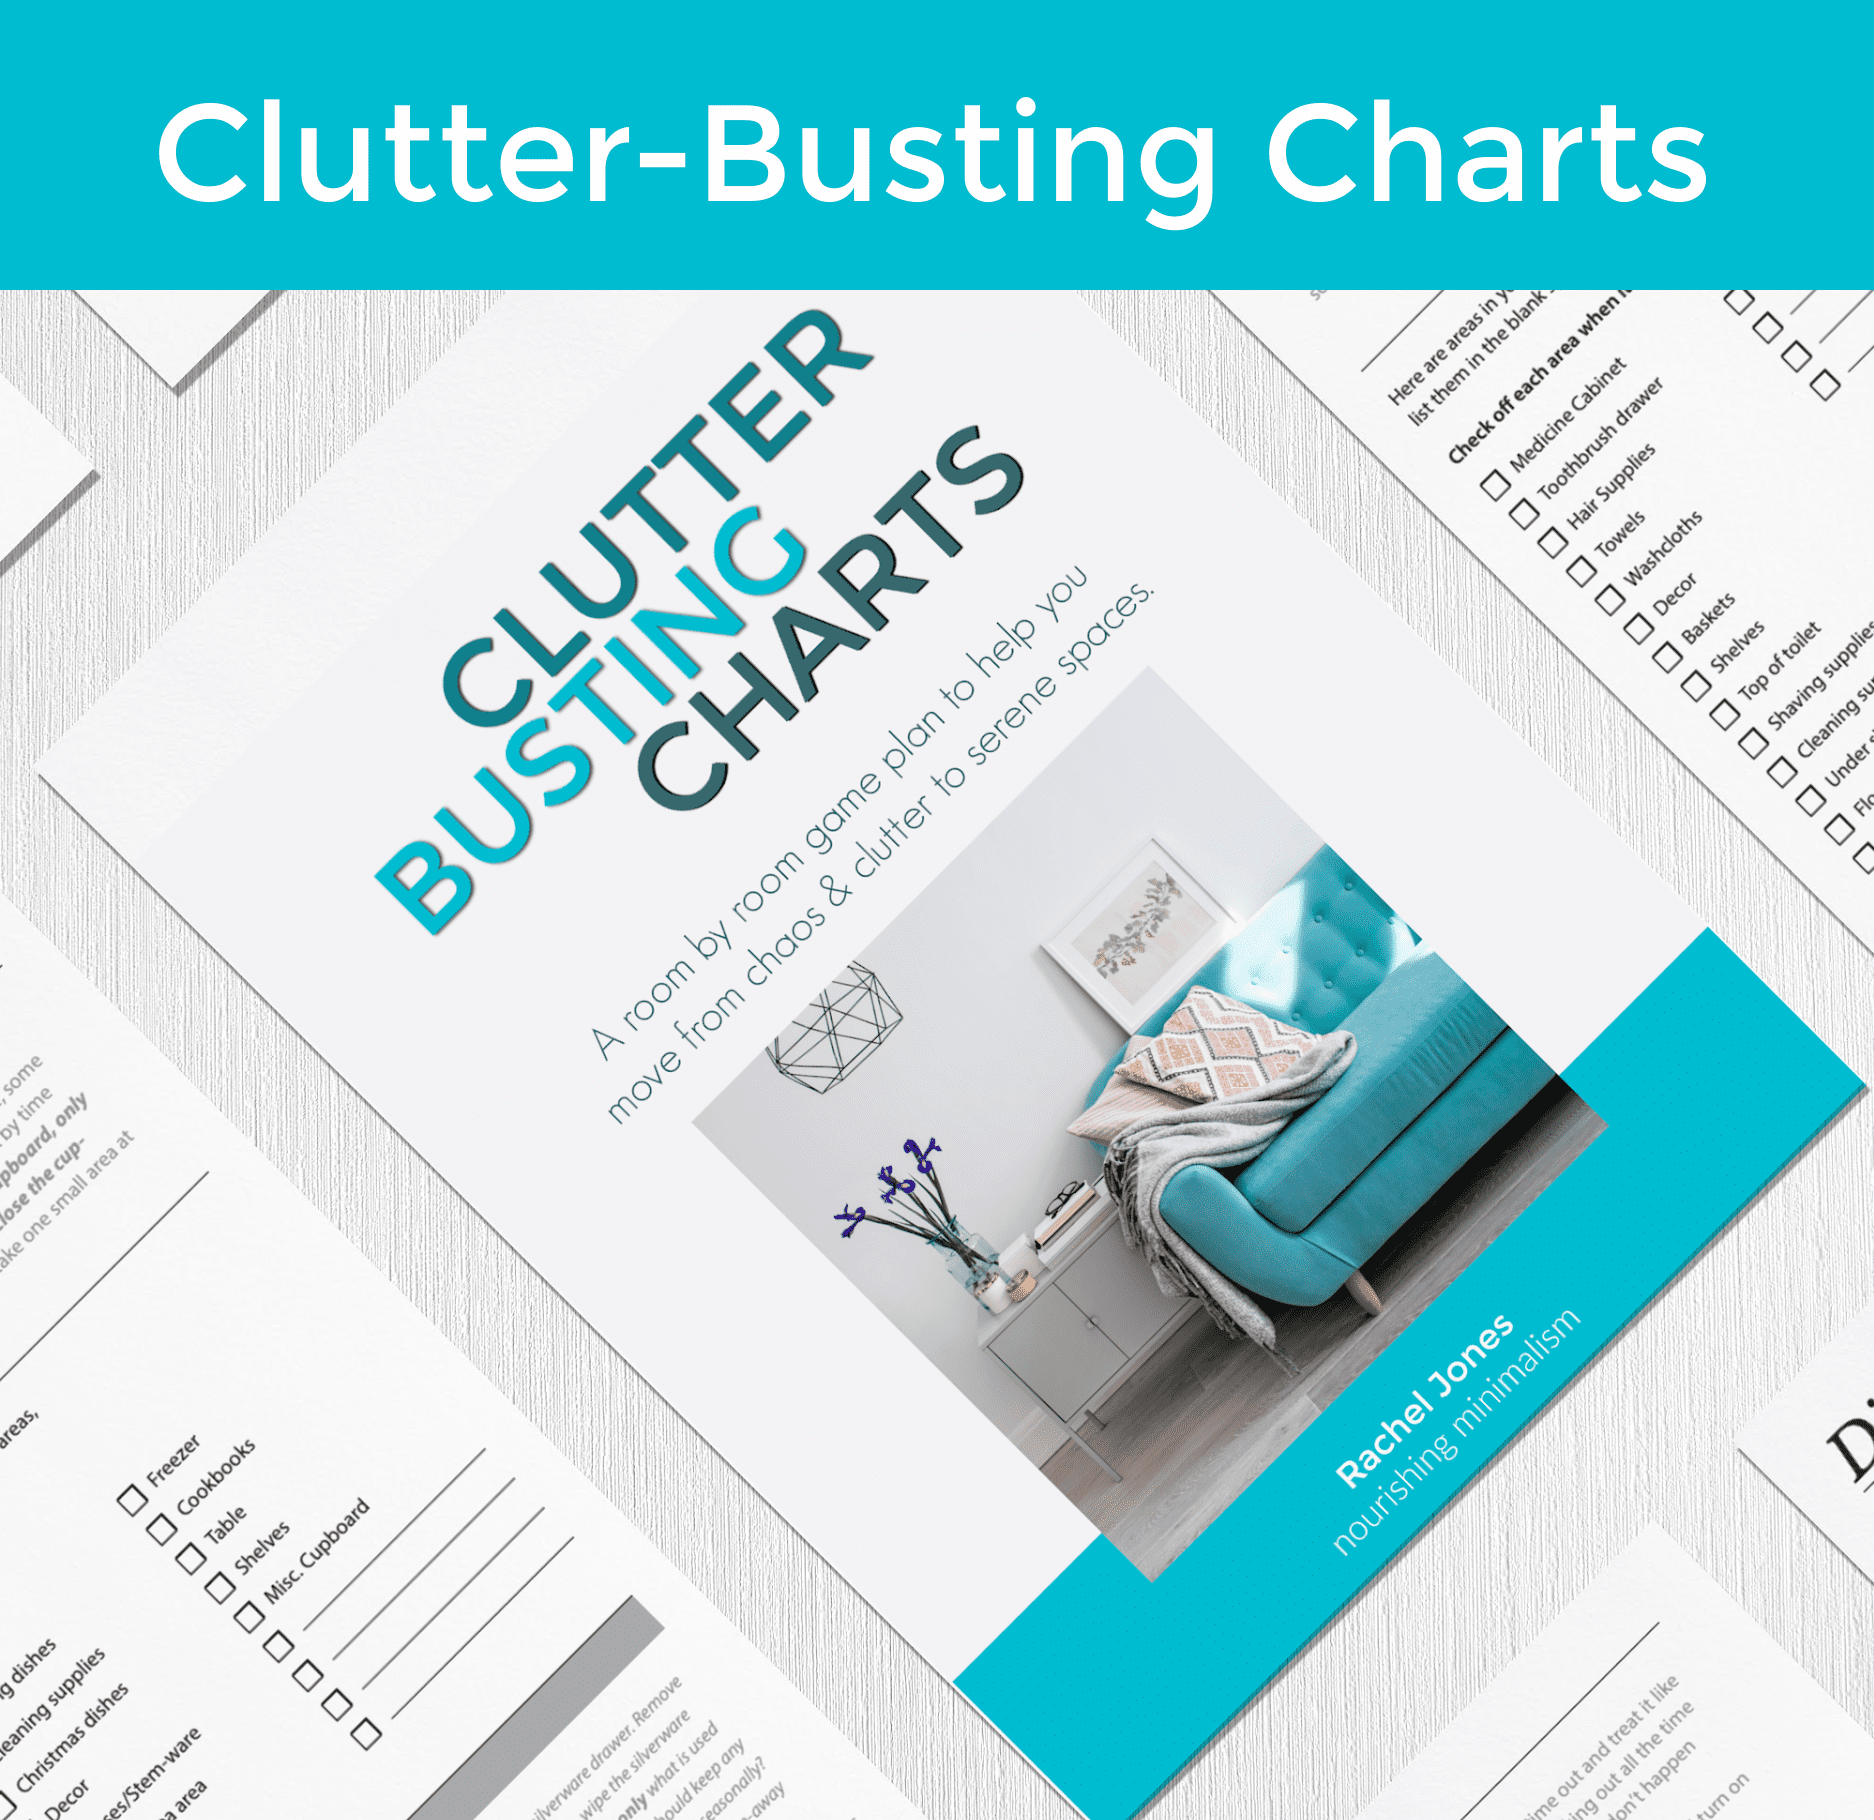 clutter-busting charts (2)